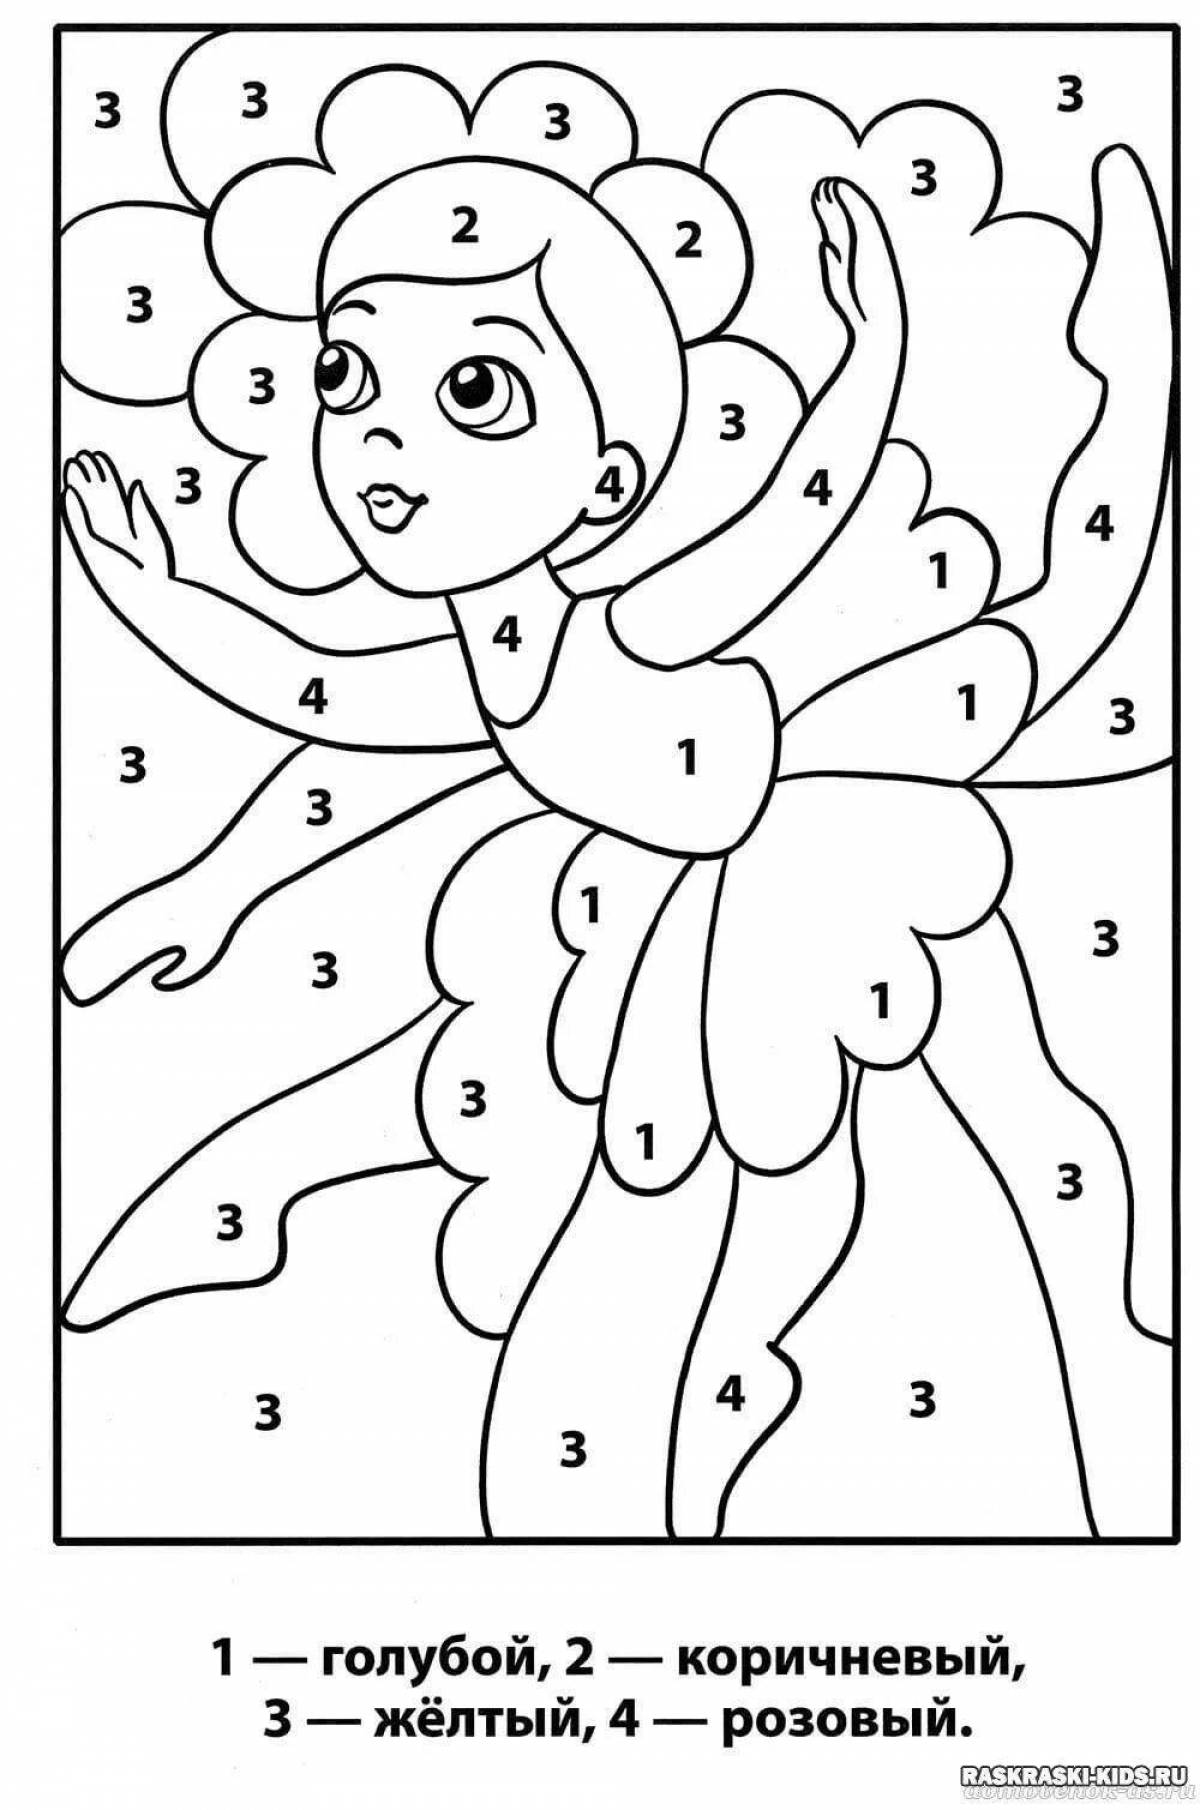 Cute coloring game for girls 3 years old